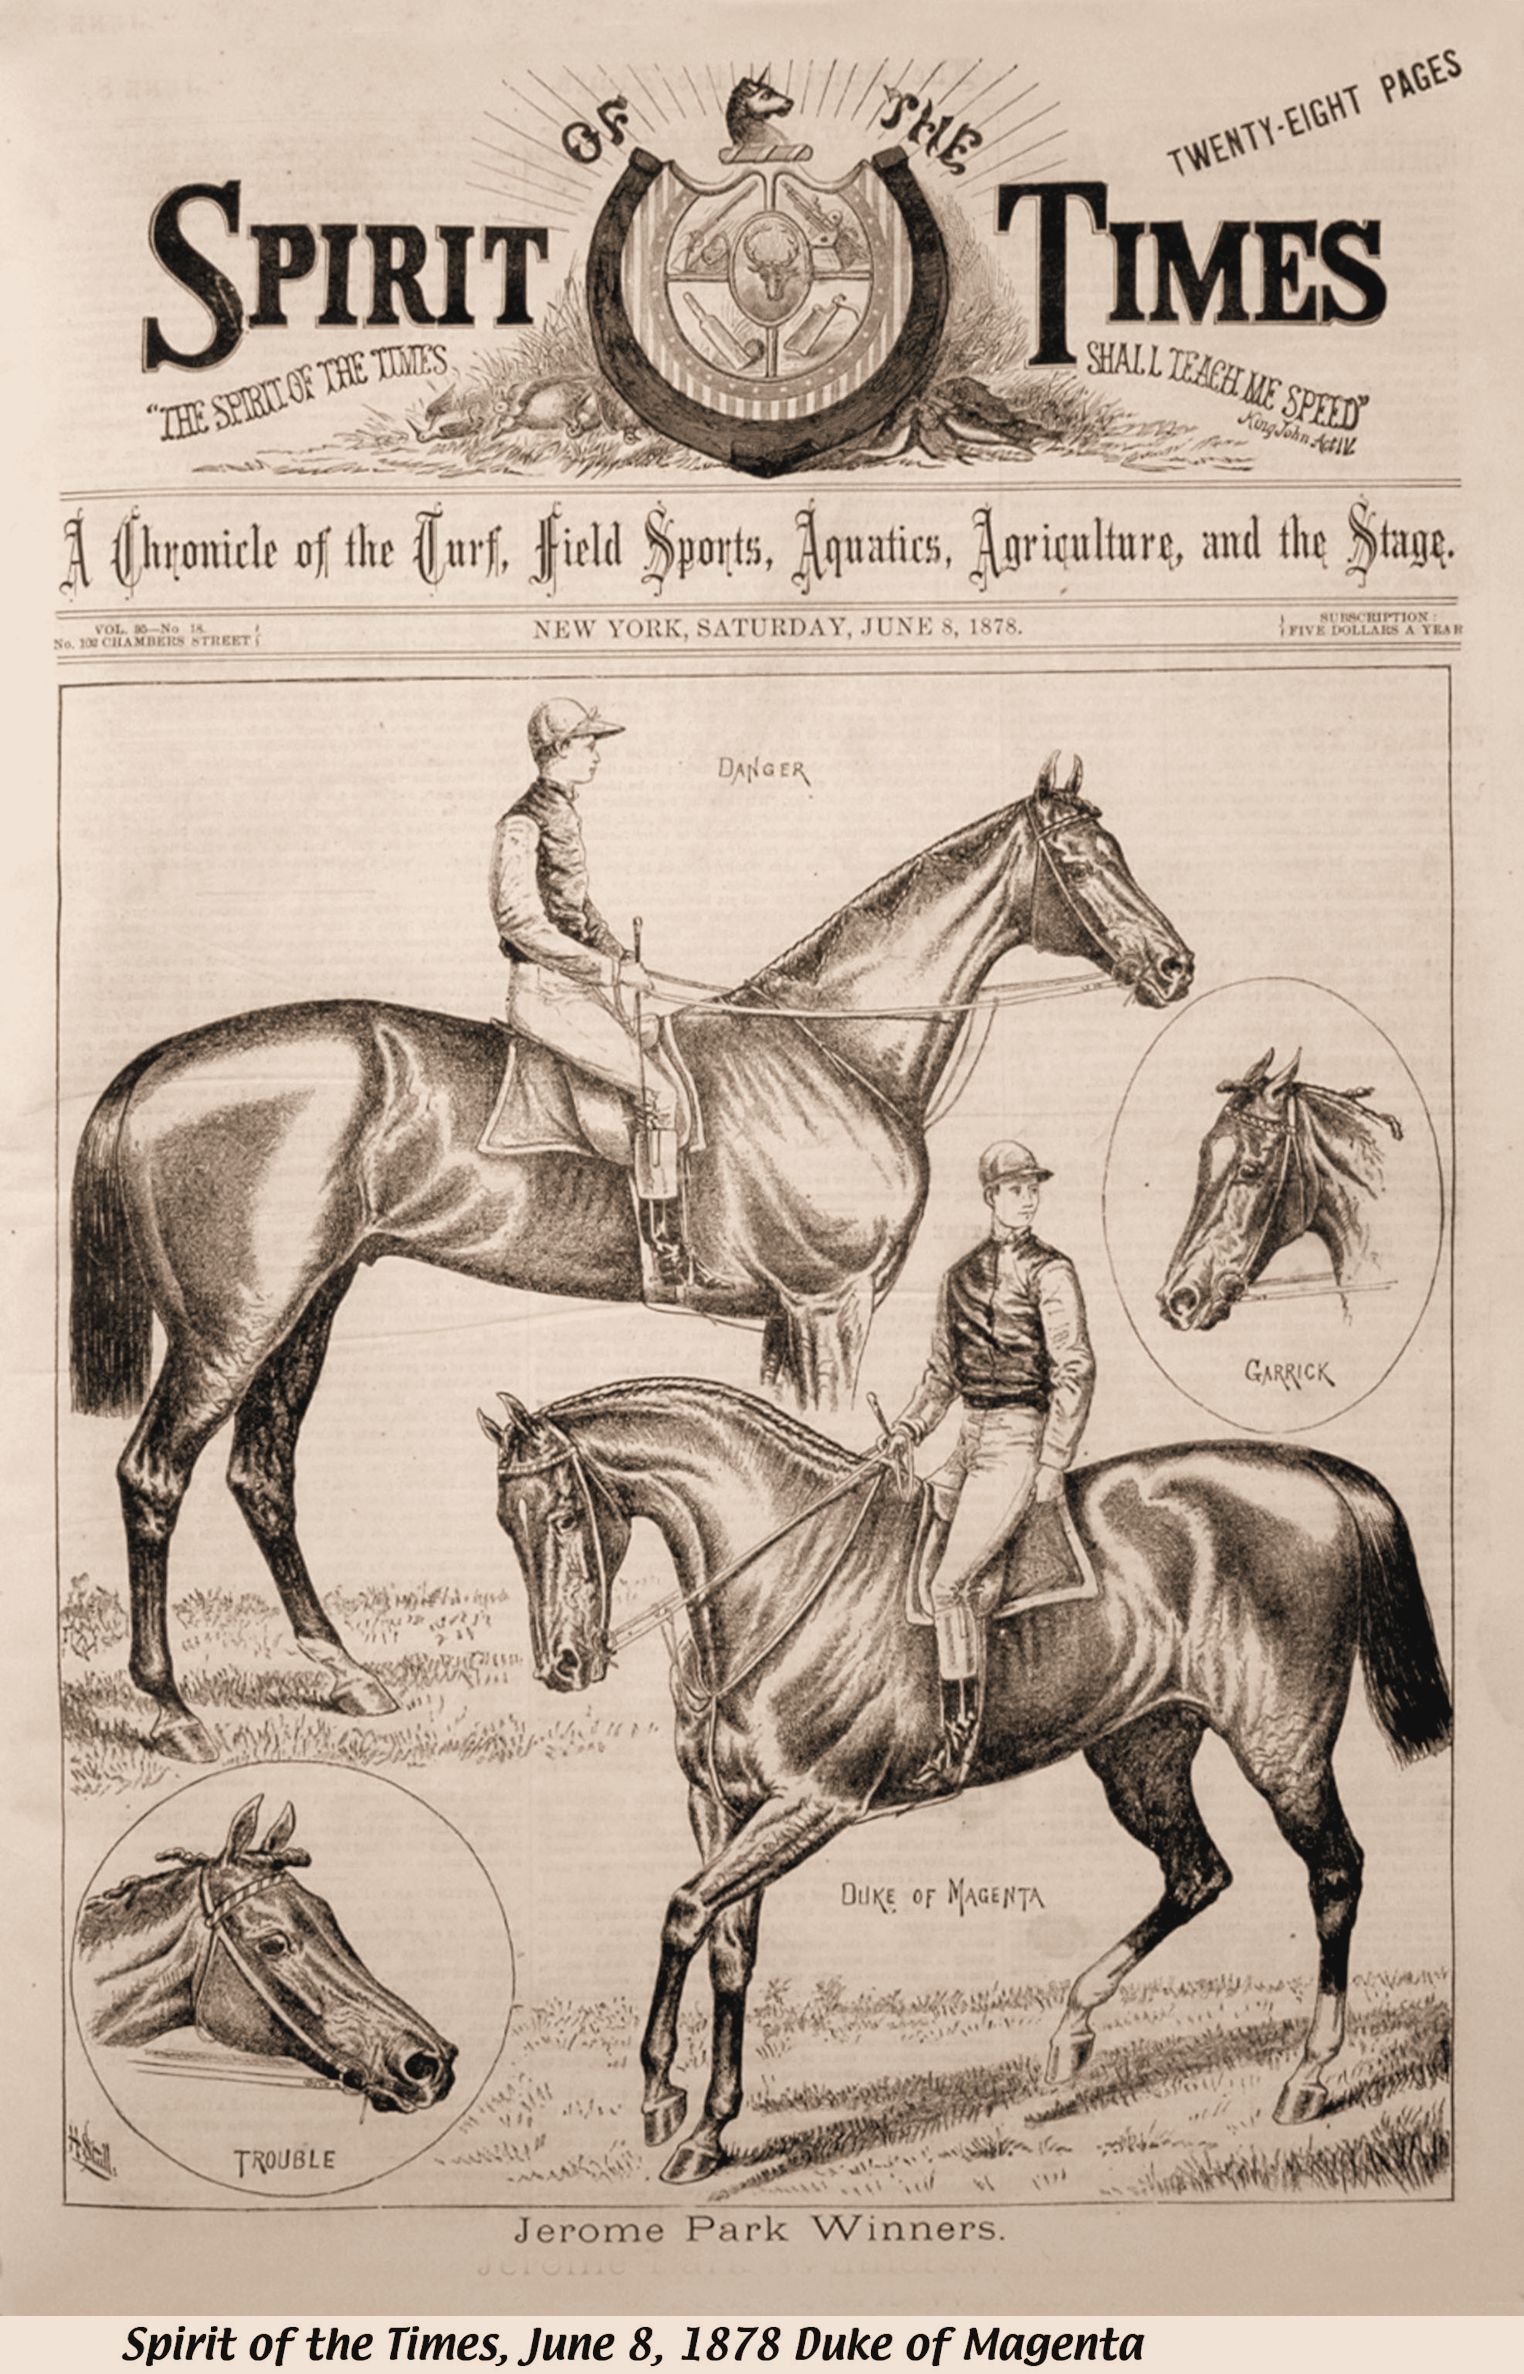 Illustration of Duke of Magenta (on right) from the June 8, 1878 issue of "The Spirit of the Times" (Keeneland Library Collection)